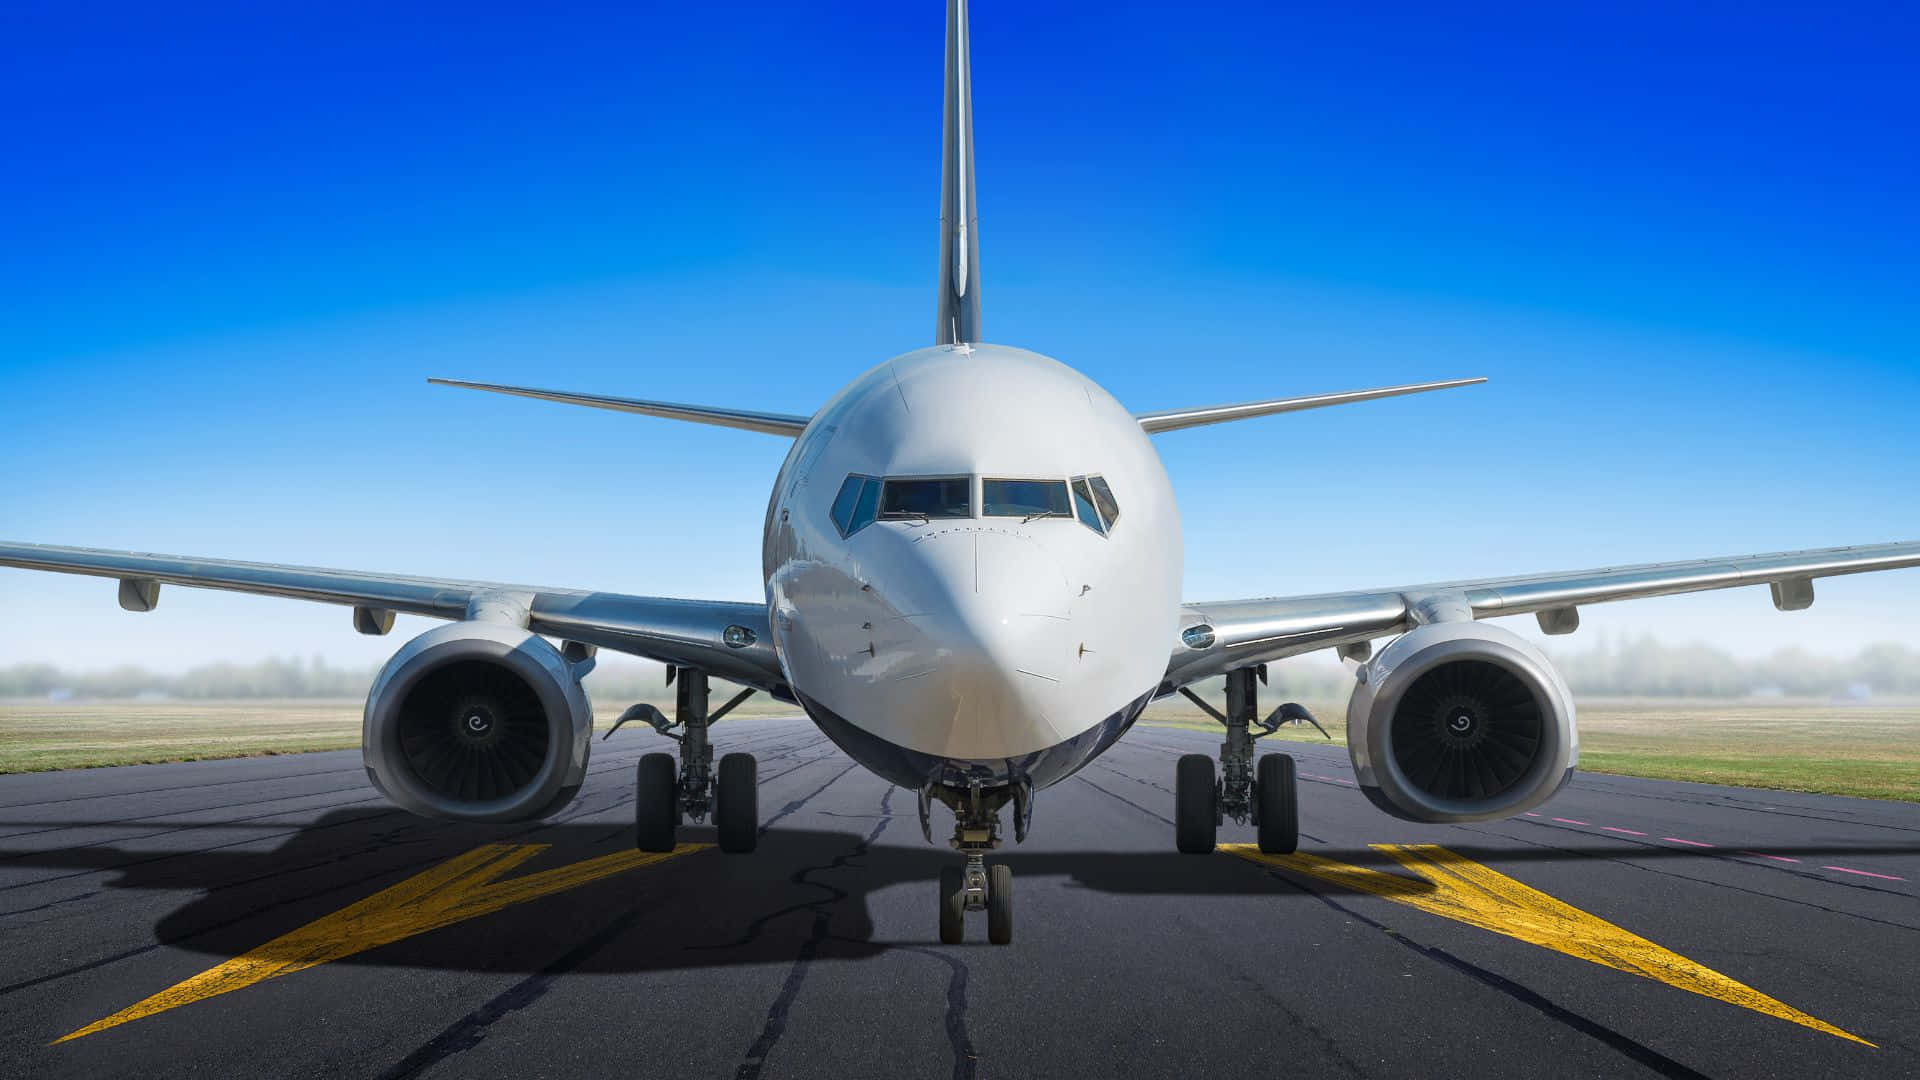 Airplane In Paved Runway Background